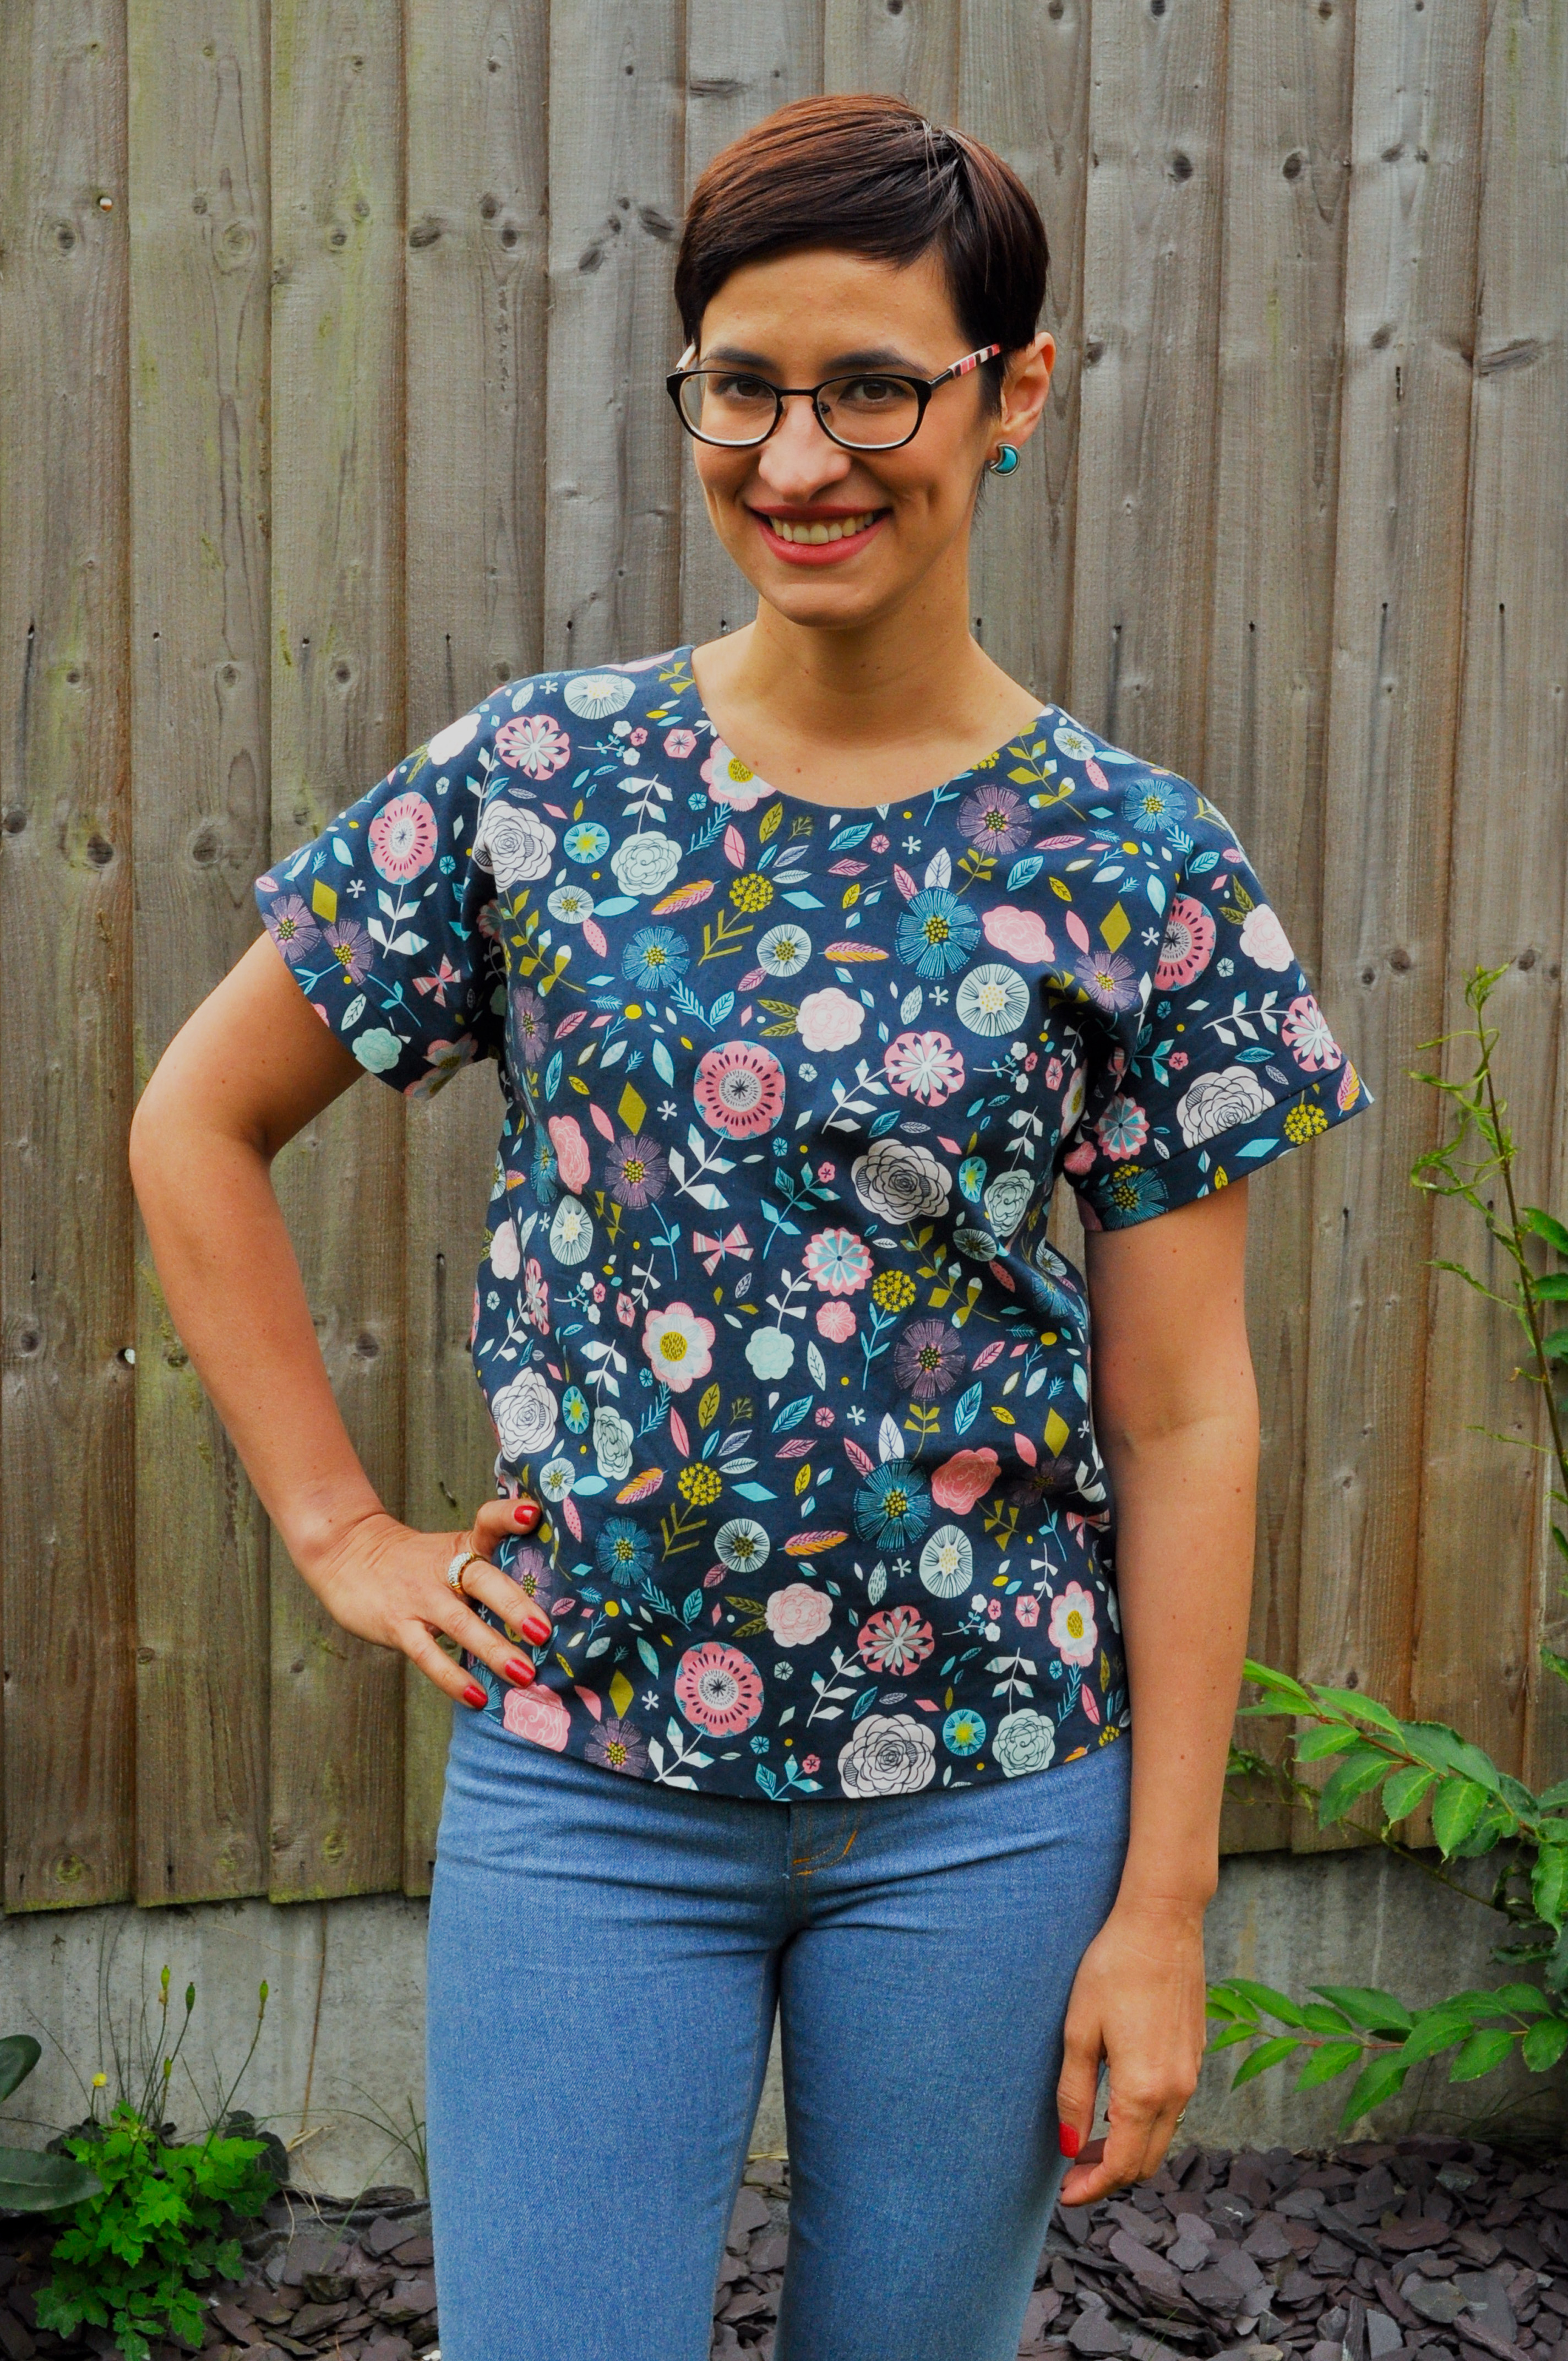 Stevie top by Tilly and the Buttons